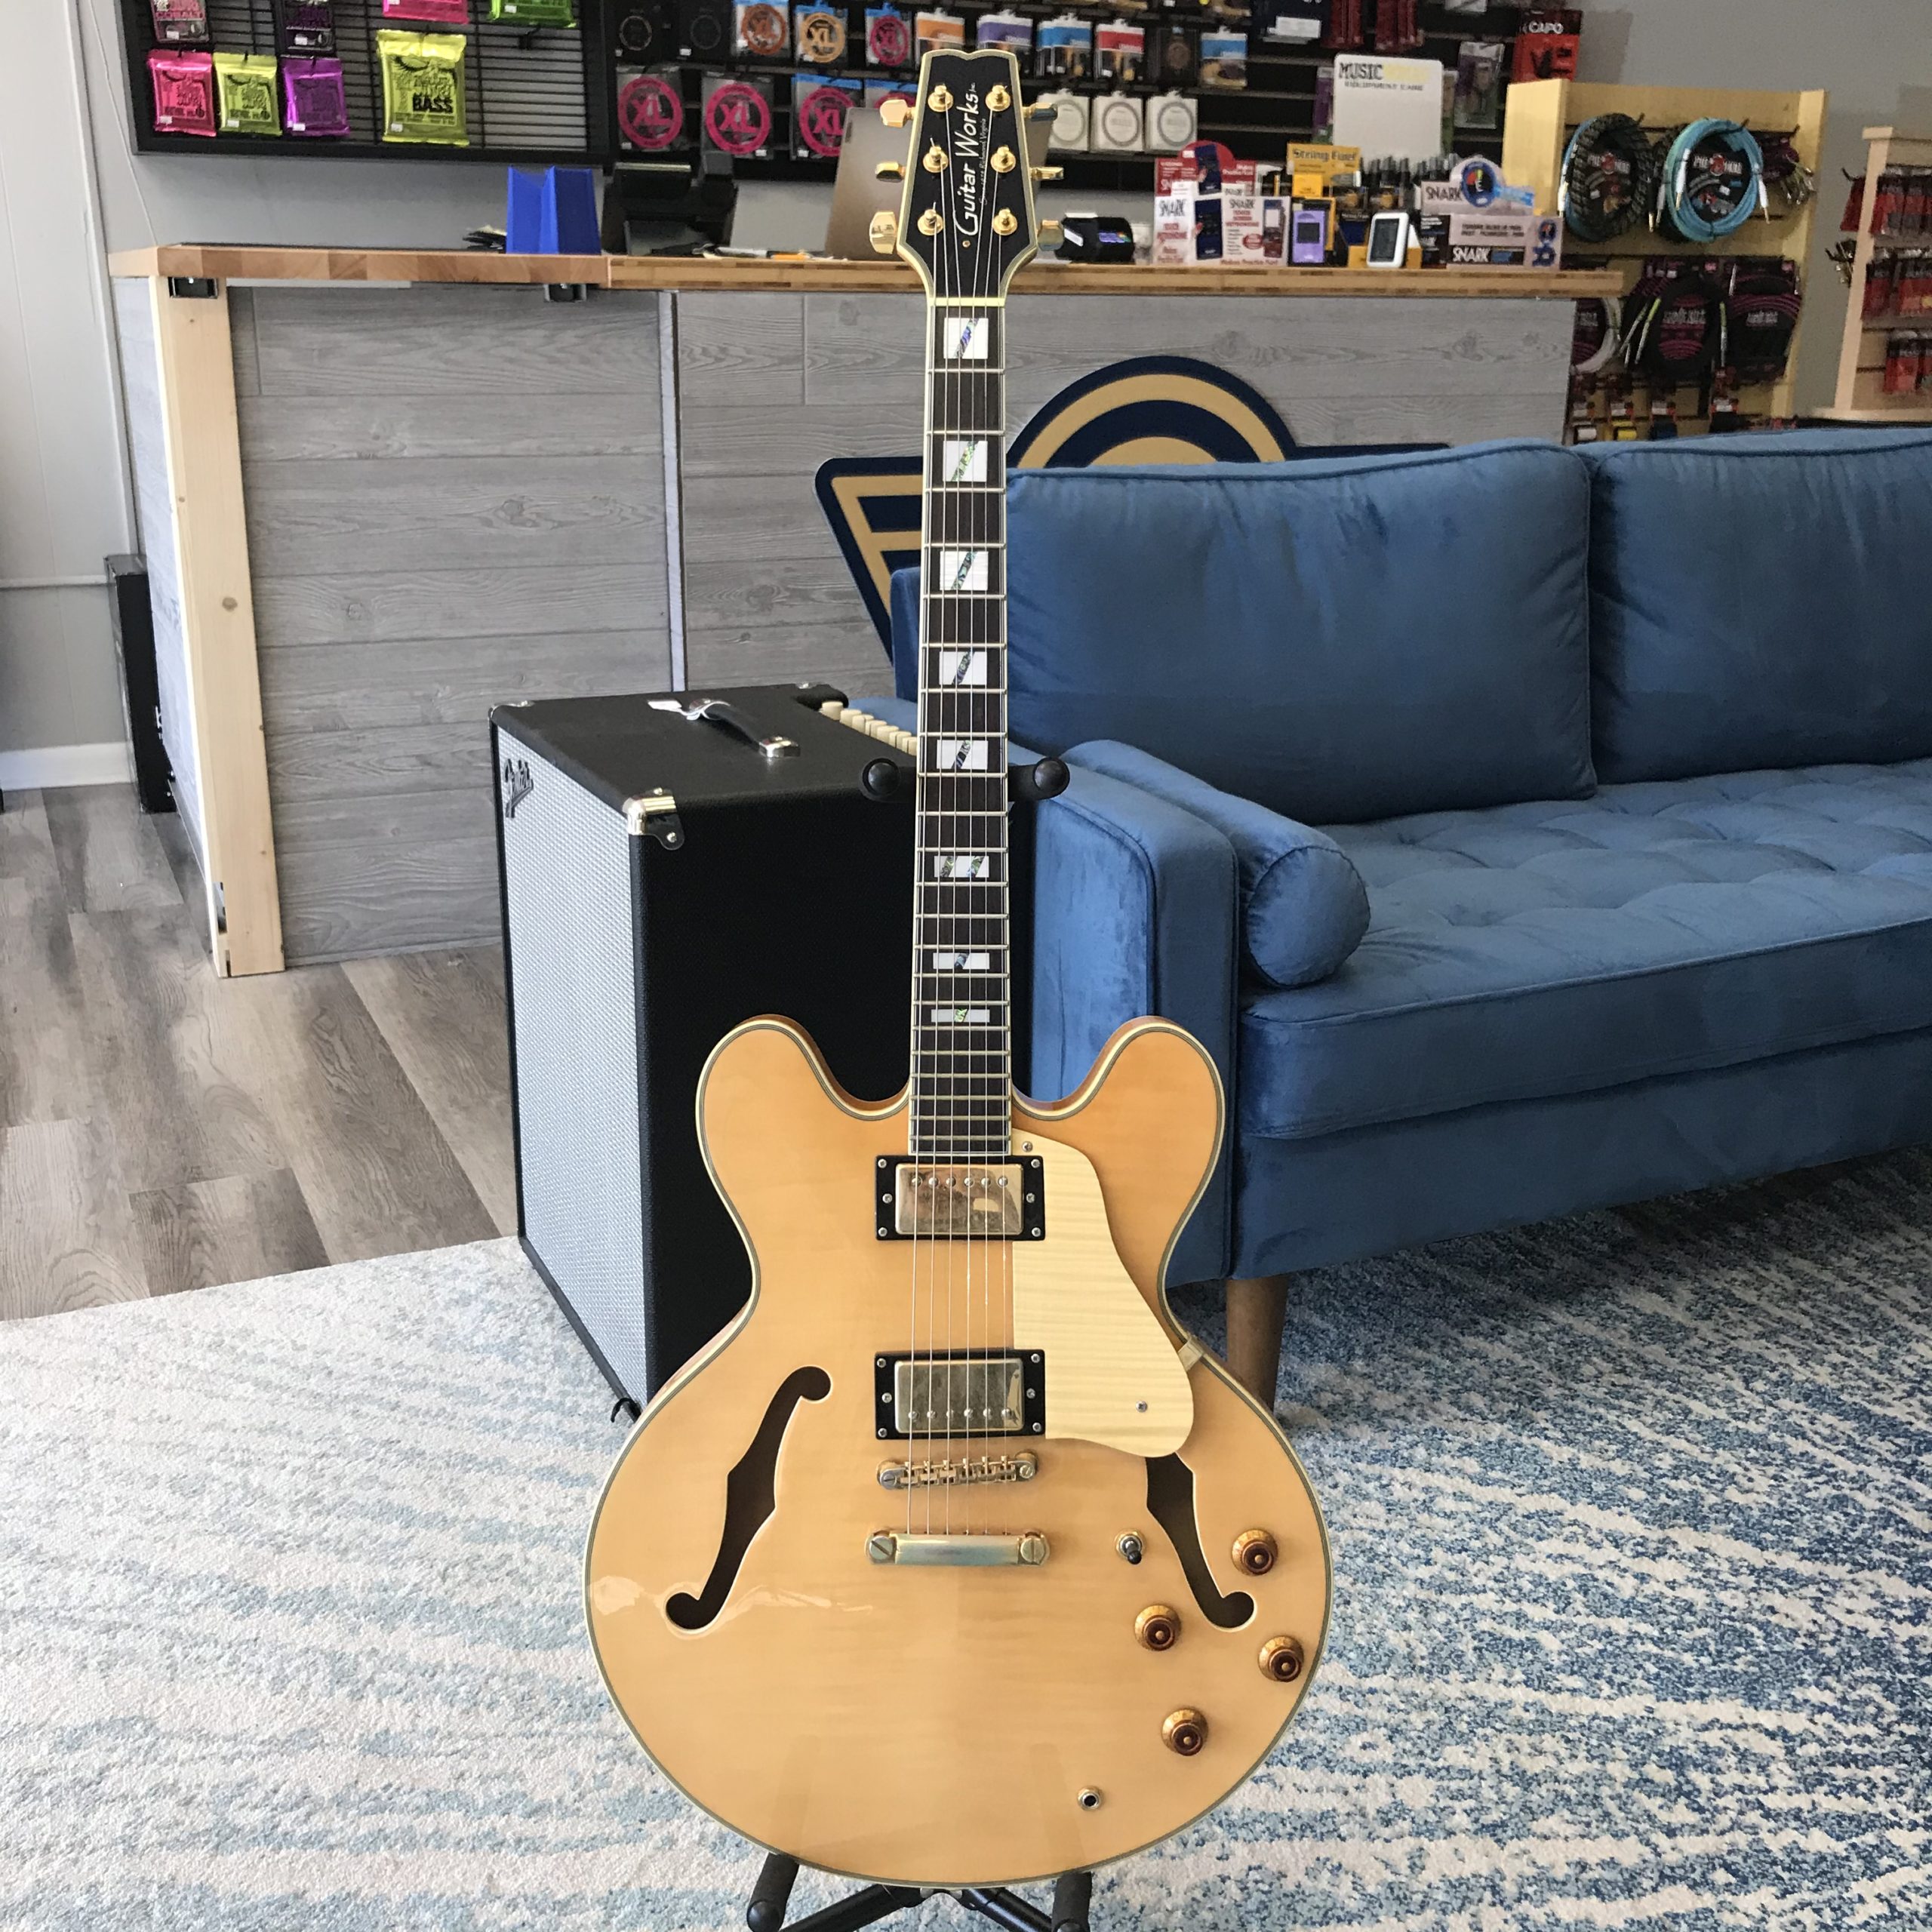 Picture of a GuitarWorks Semi-Hollow guitar